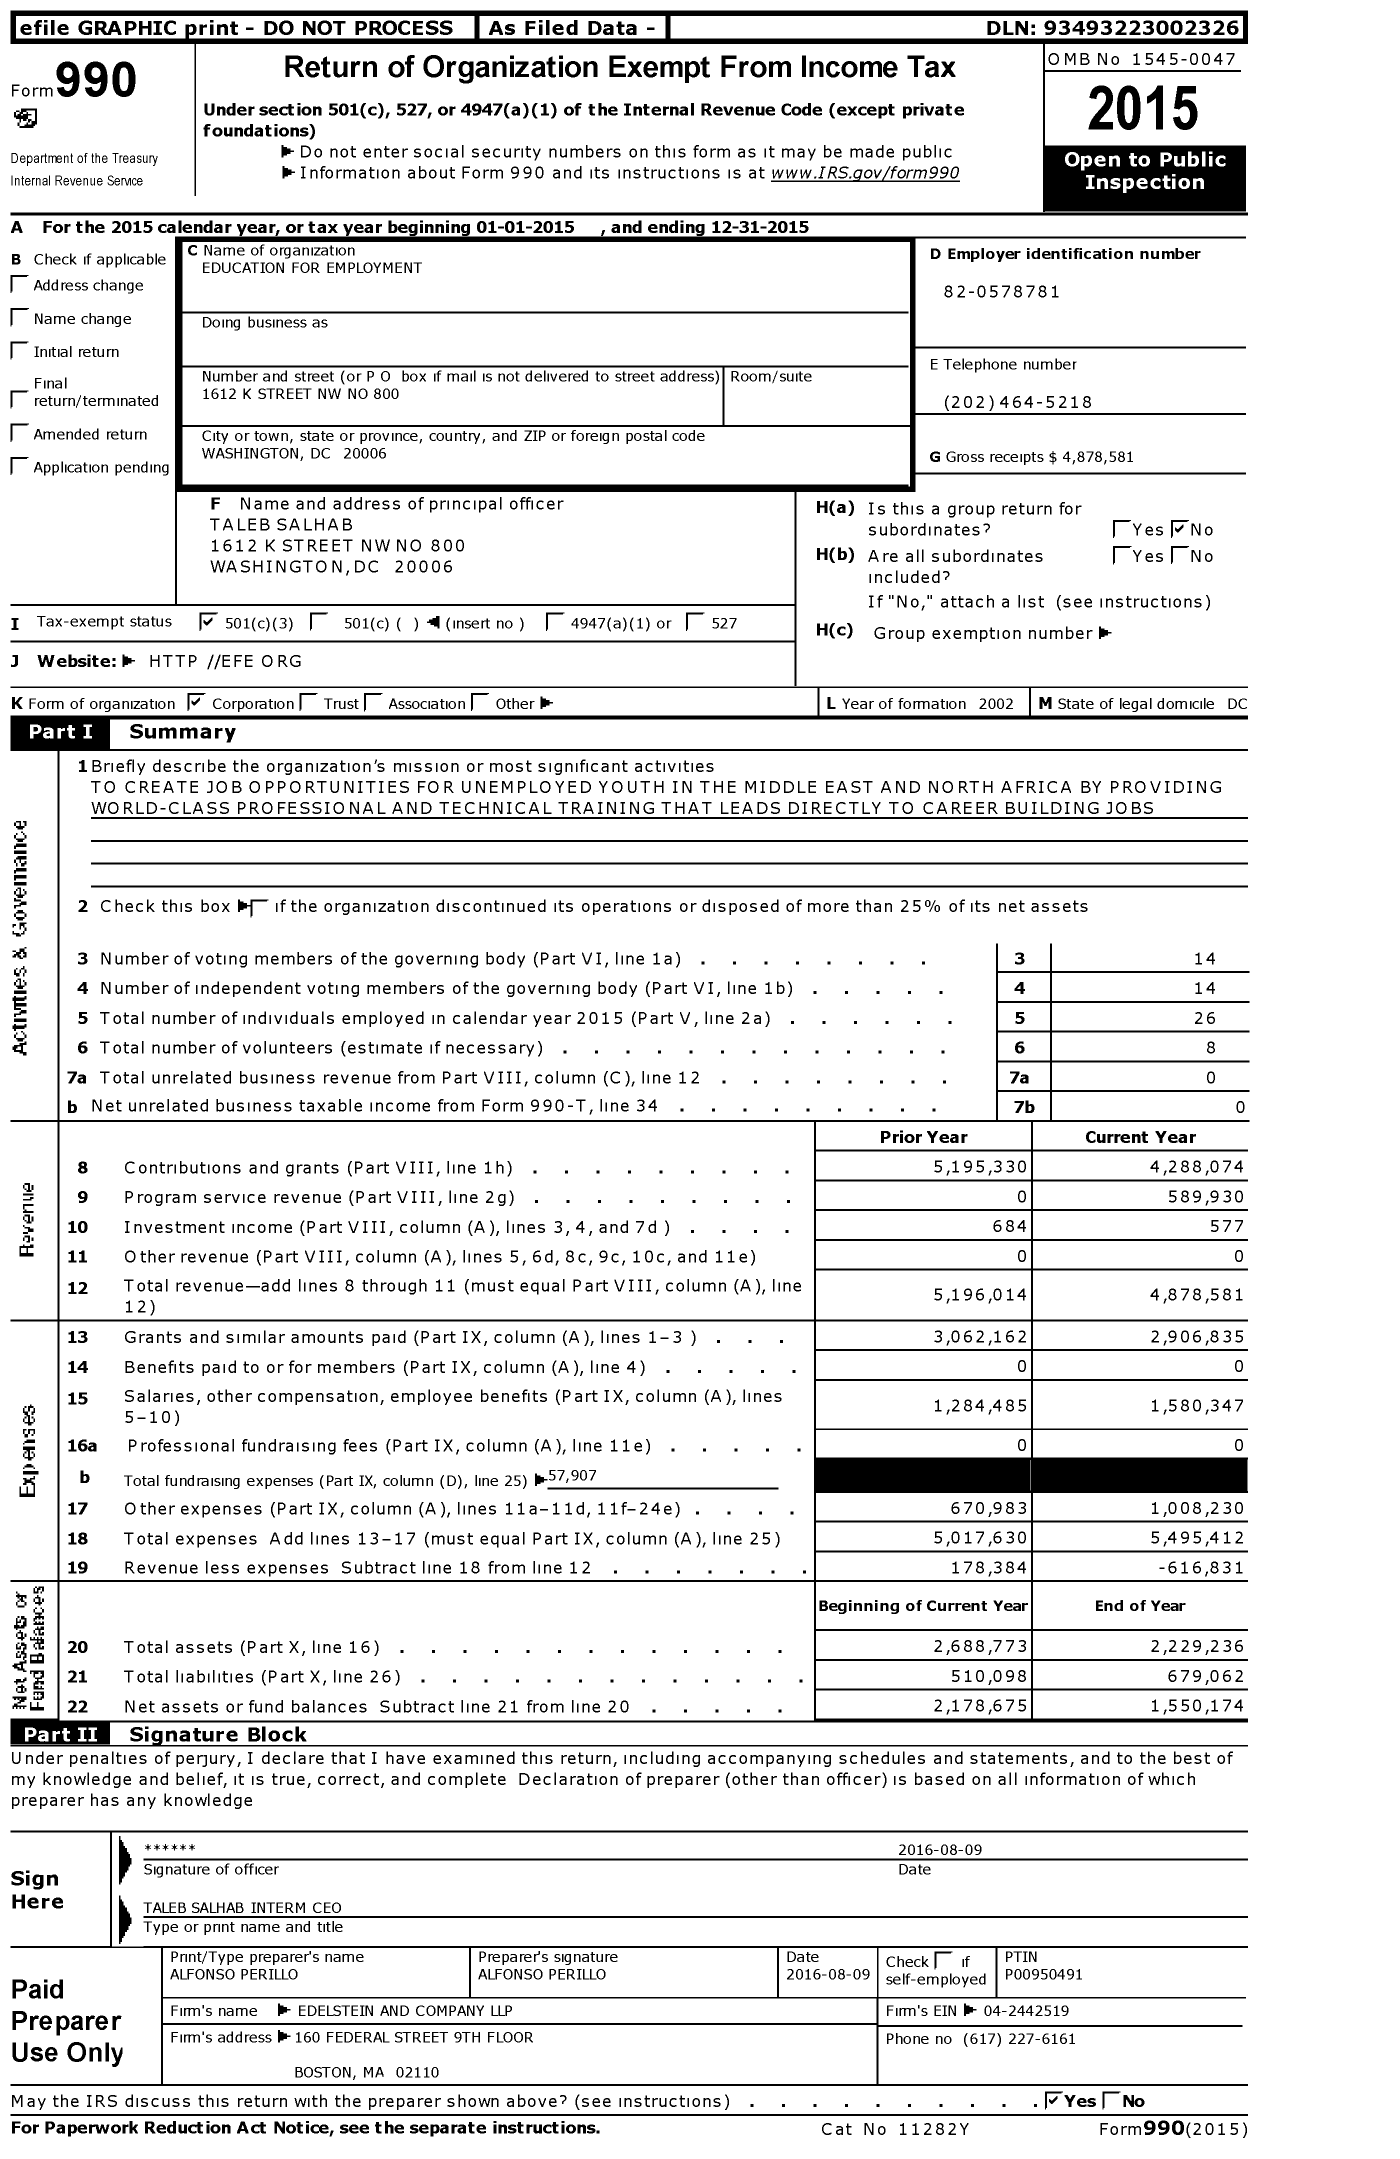 Image of first page of 2015 Form 990 for Education for Employment